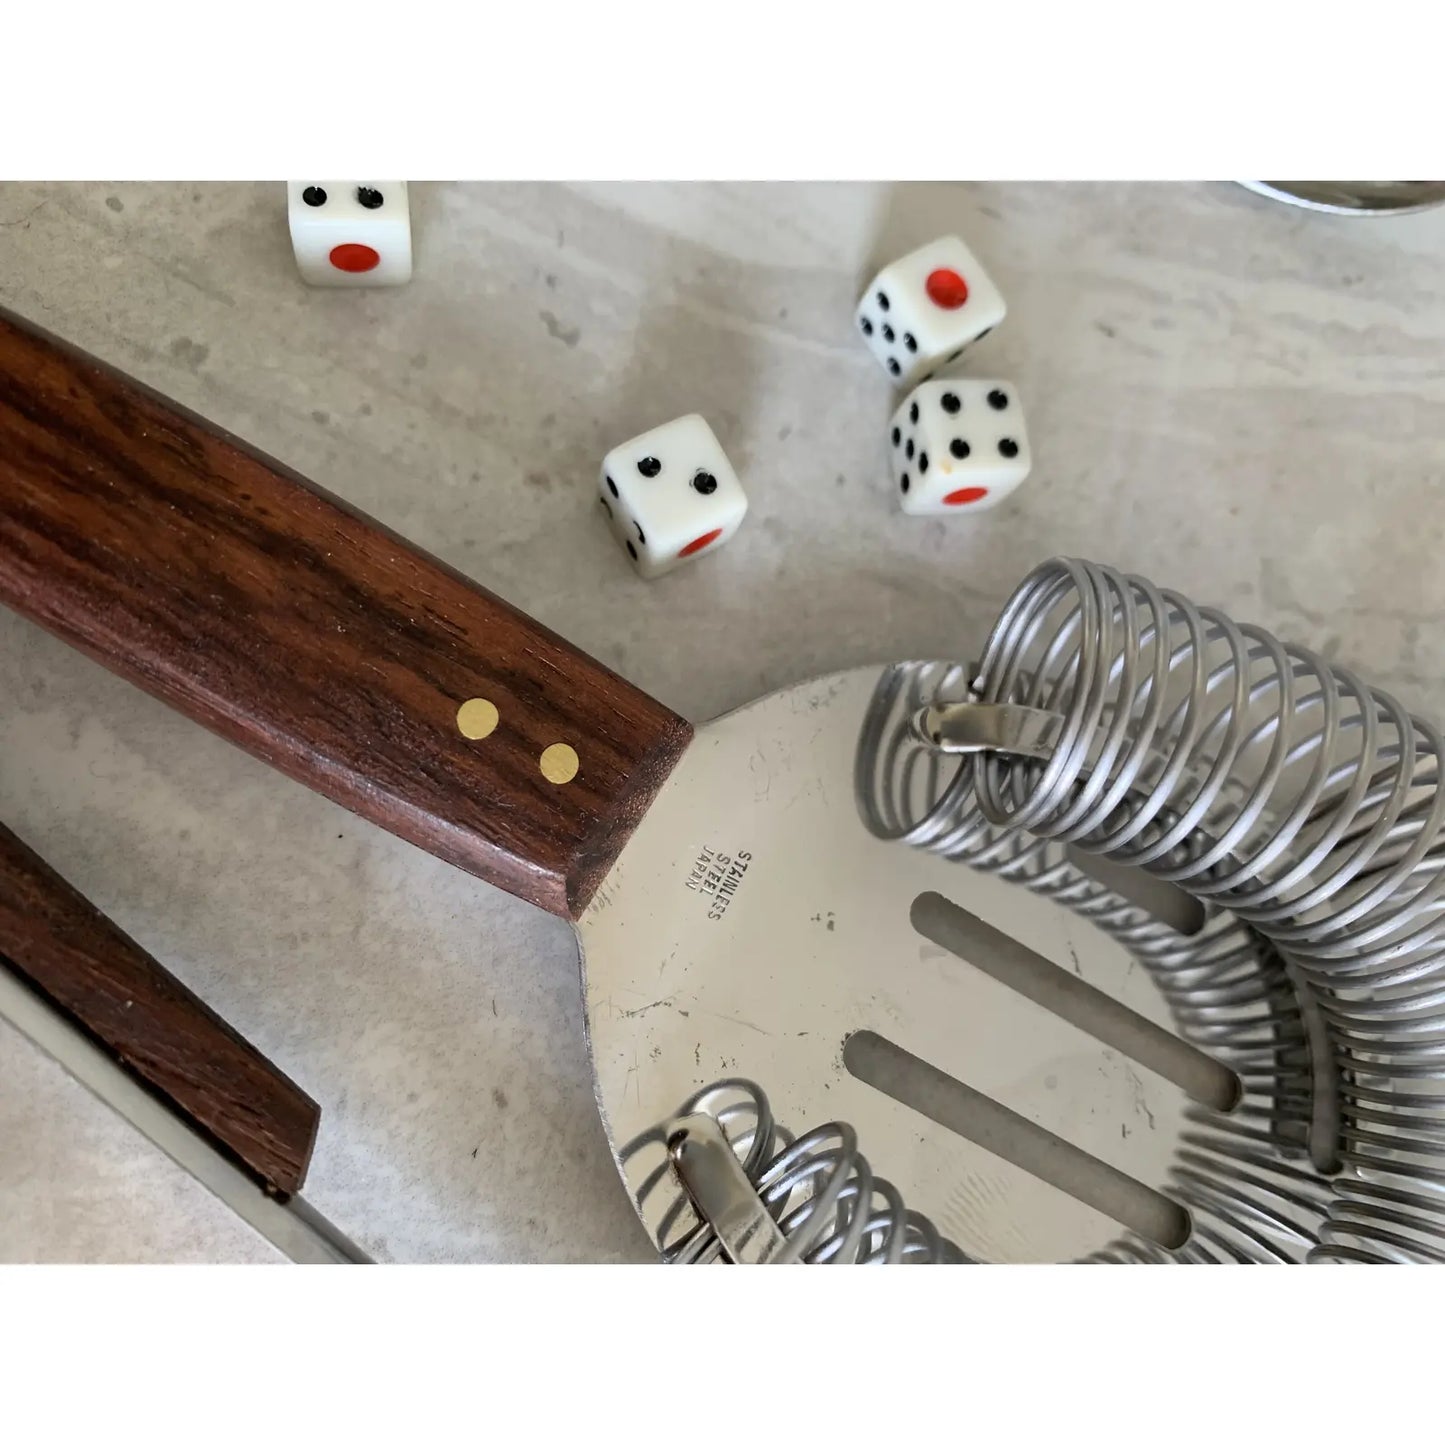 1960s Mid-Century Modern Japanese Rosewood Handled Barware With Mini Dice- 7 Pieces